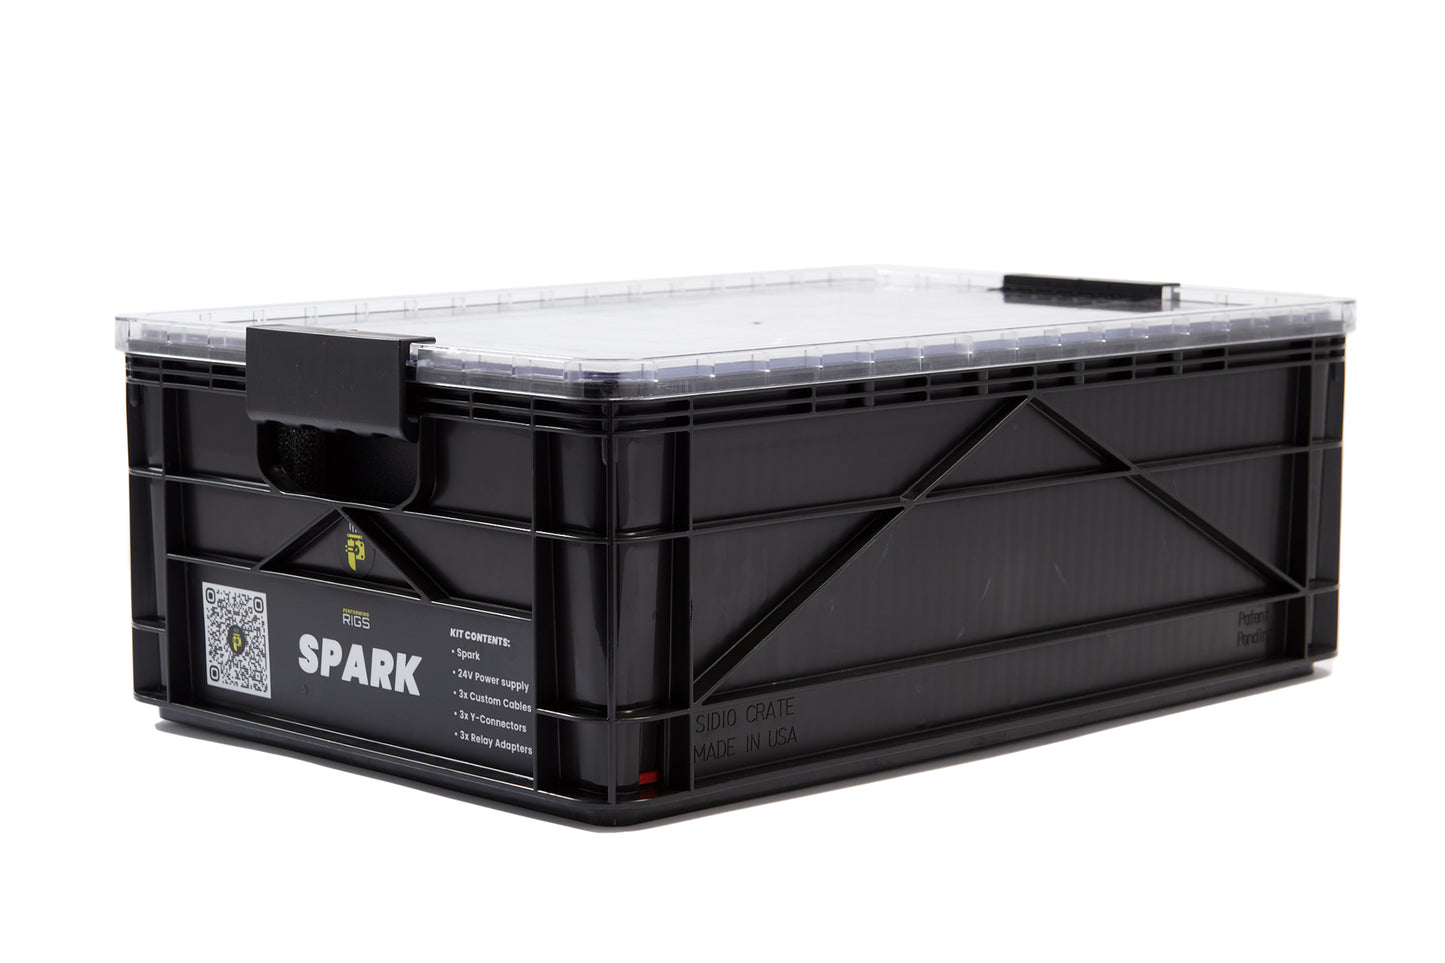 Studio Crate, Spark and Spark+